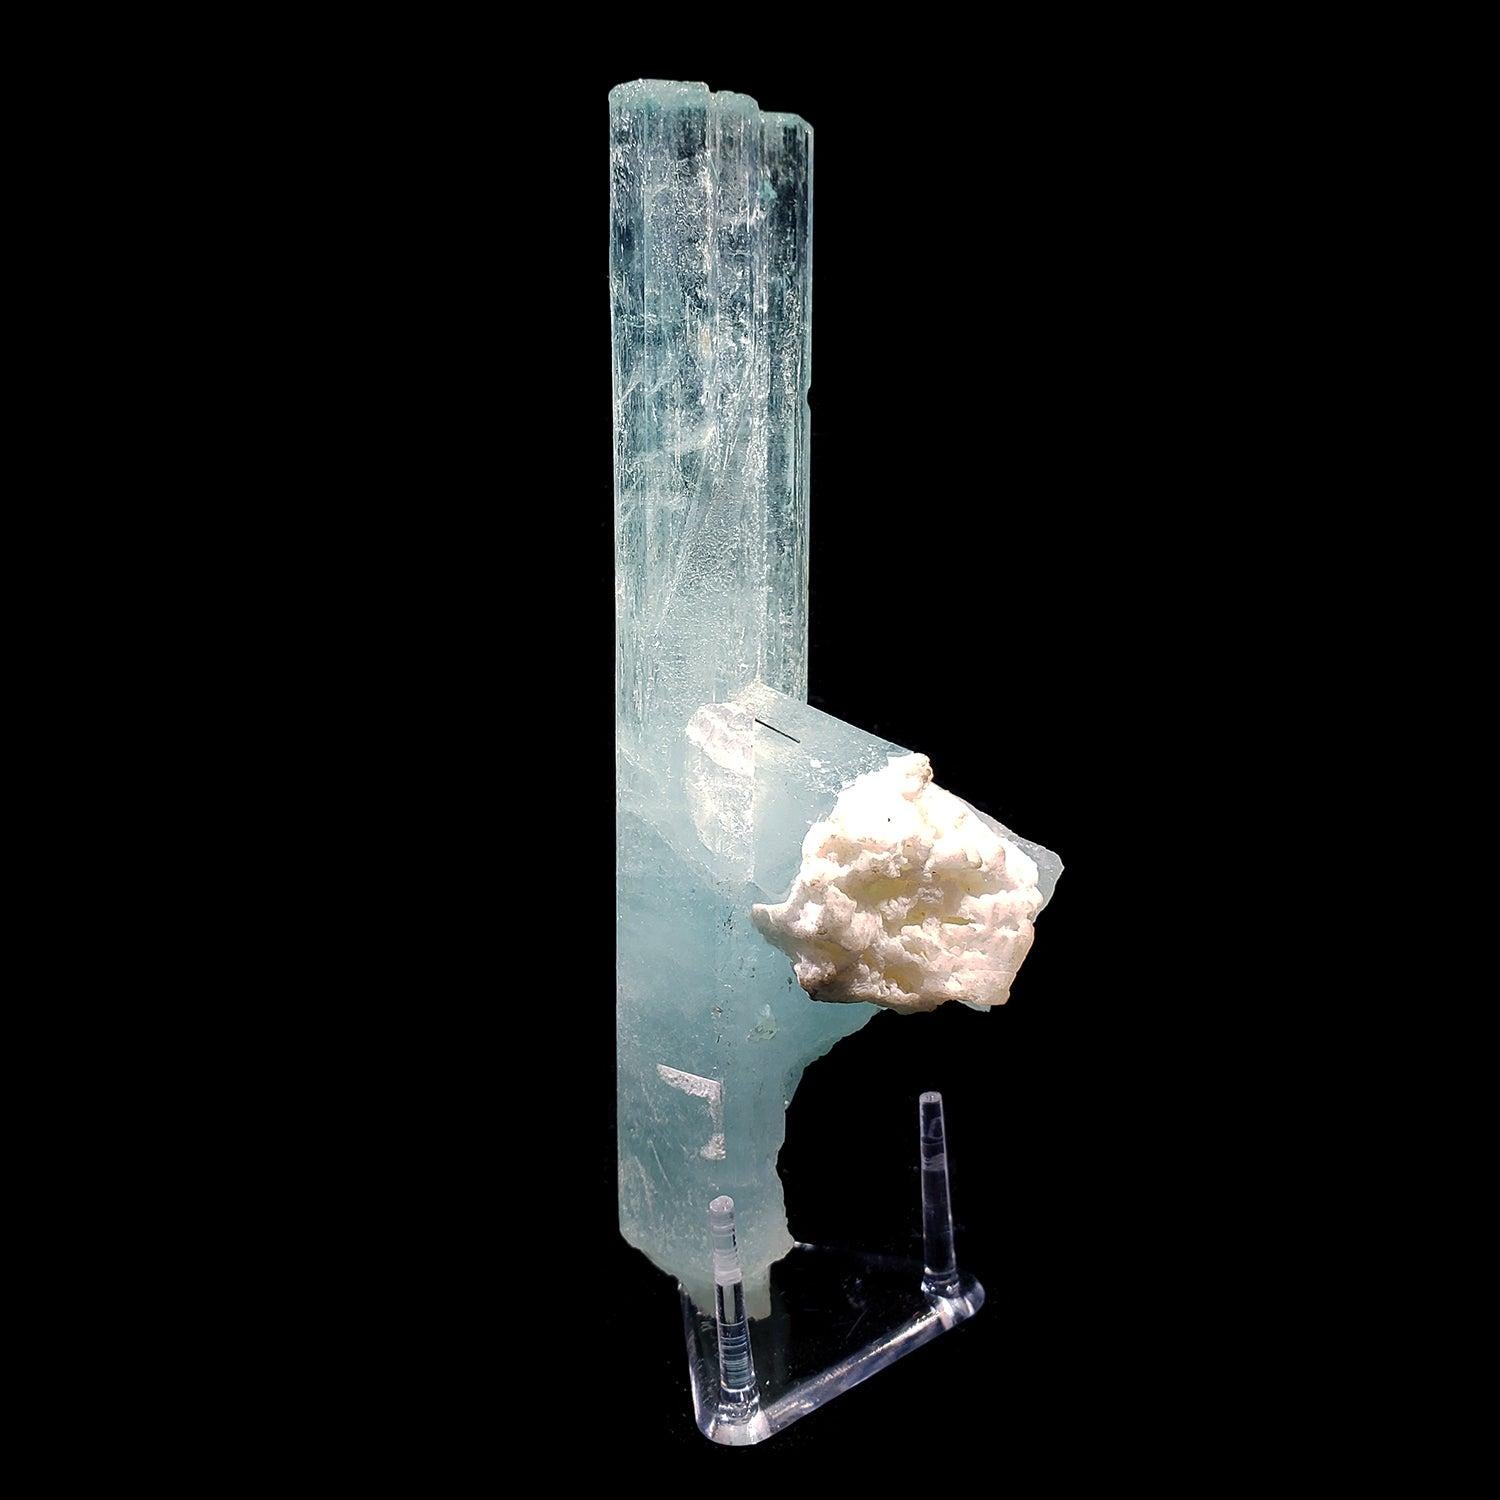 Gilgit, Pakistan

This aquamarine specimen features a black tourmaline inclusion and secondary aquamarine crystal growing from it with a feldspar matrix attached to it.

Dimensions: 1.25